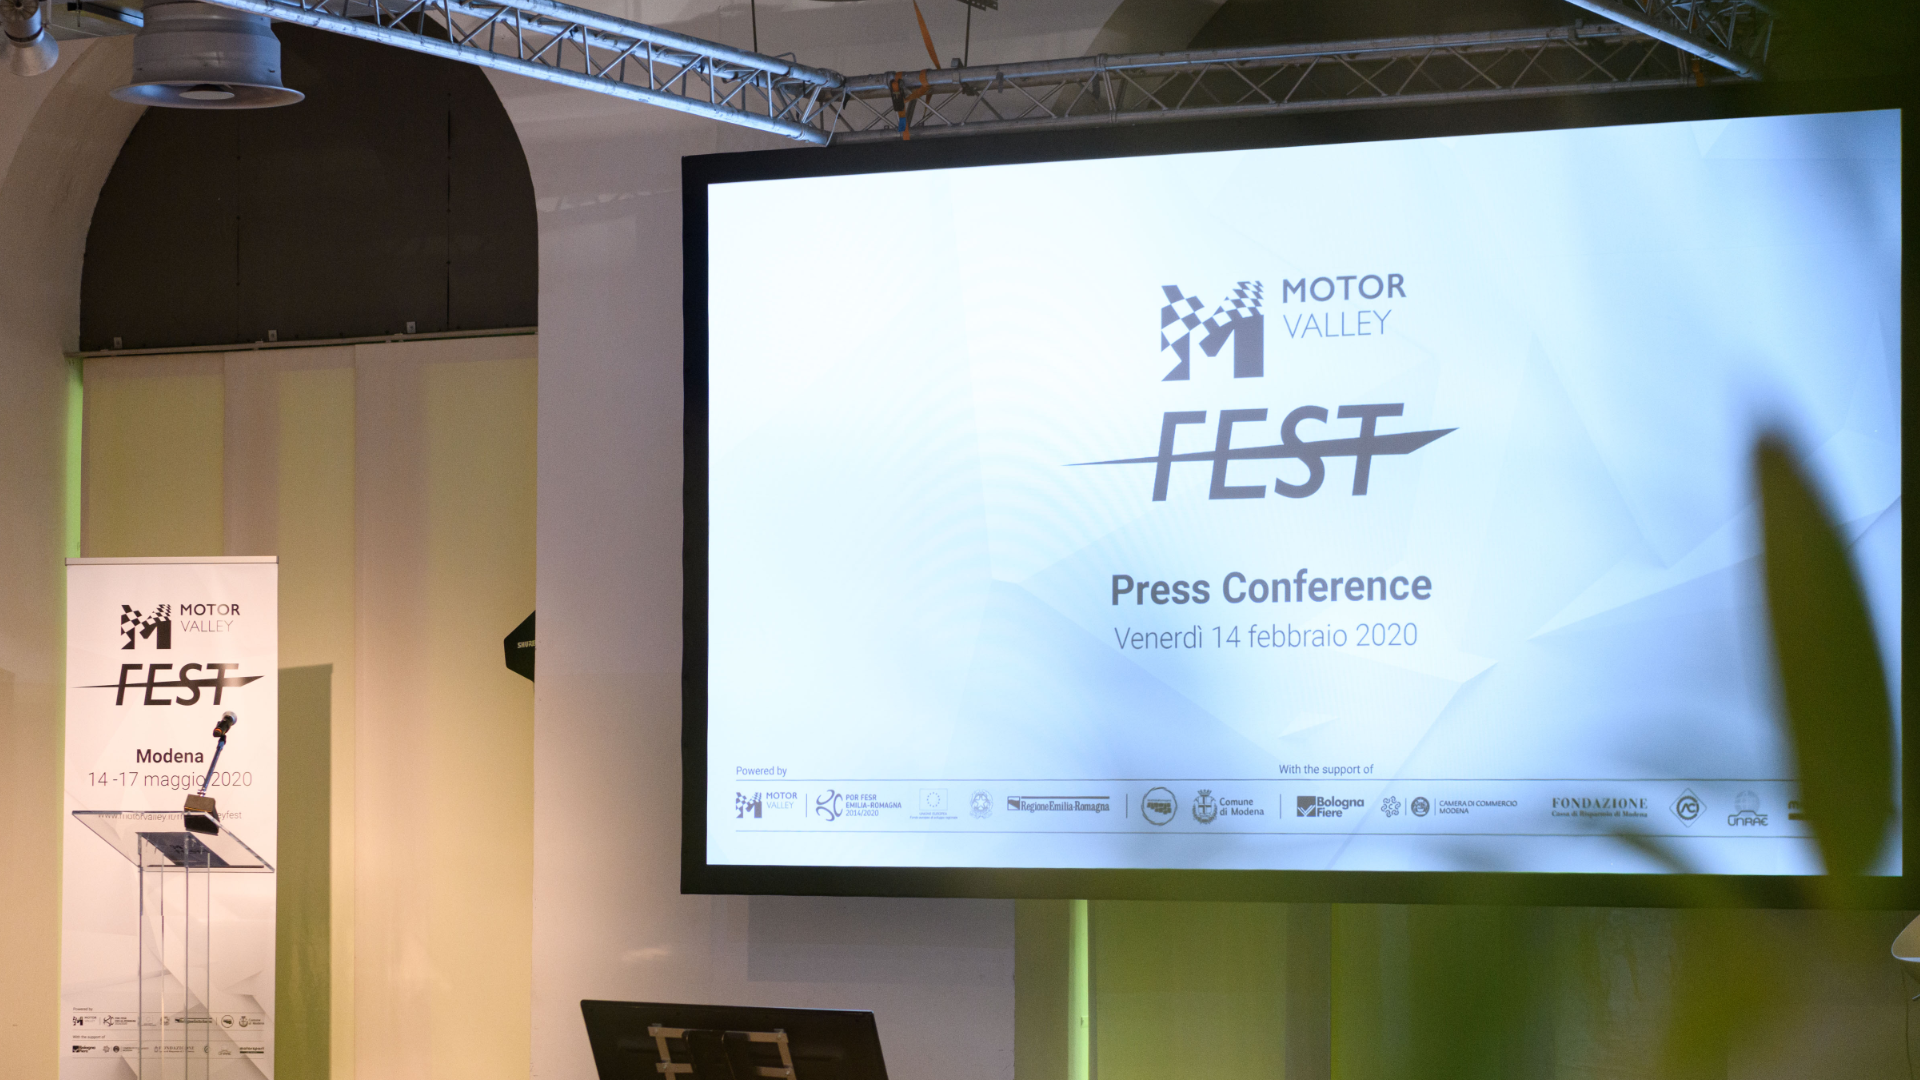 Motor Valley Fest: the second edition of the popular festival returns to Modena from May 14-17.